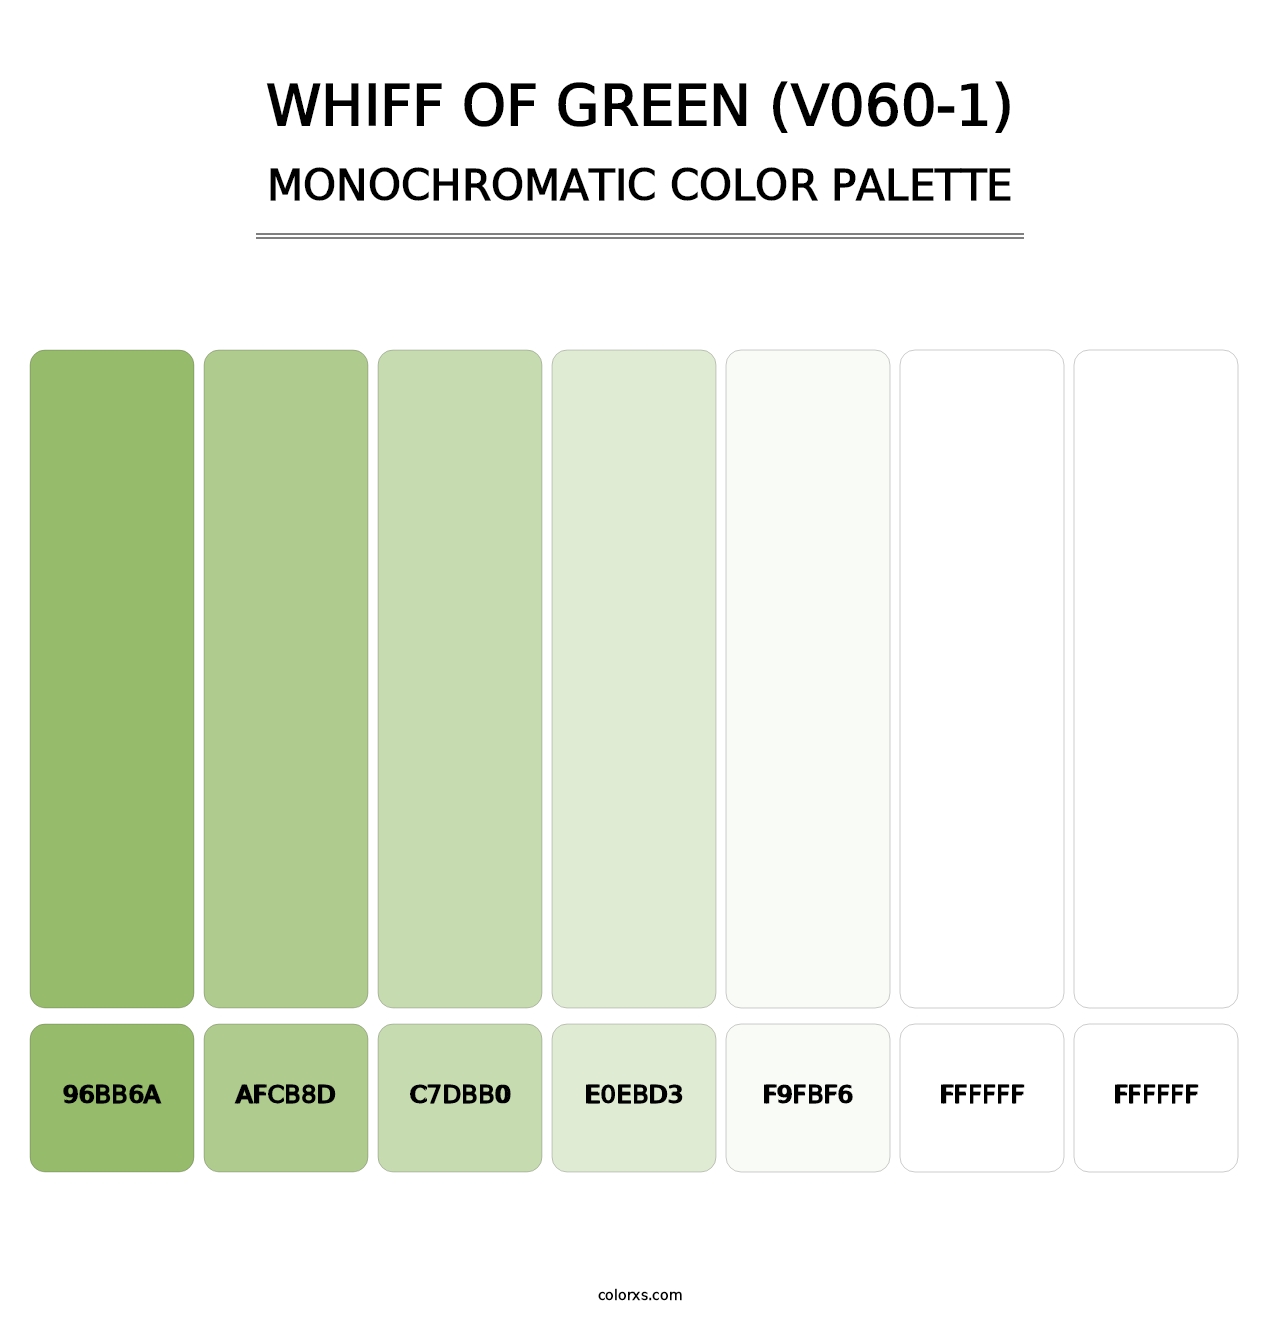 Whiff of Green (V060-1) - Monochromatic Color Palette